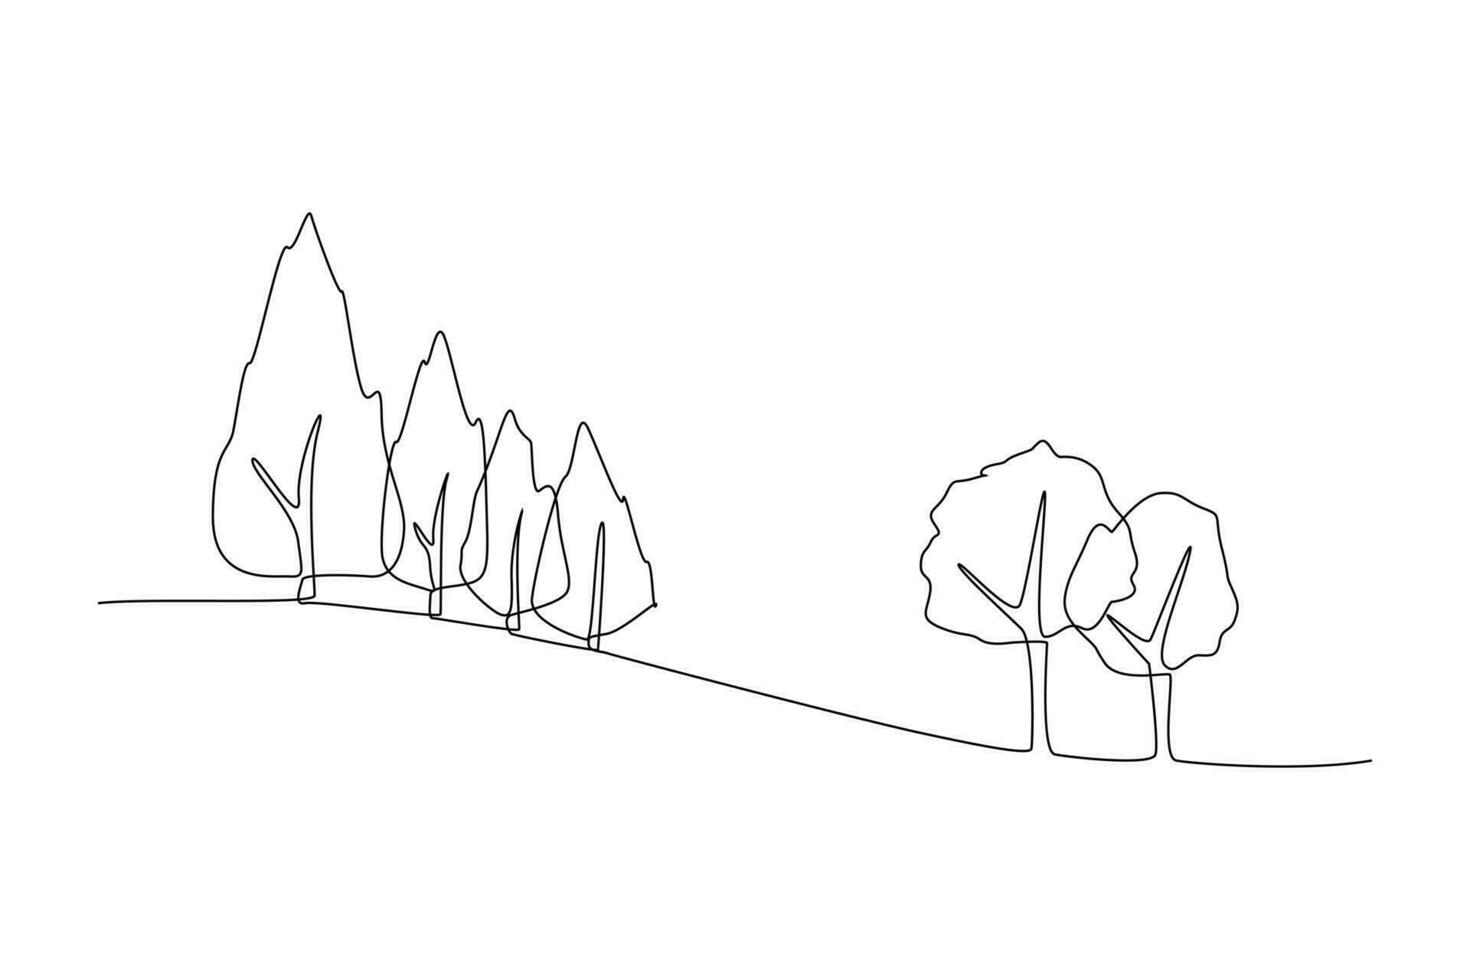 Single one line drawing Forest concept. Continuous line draw design graphic vector illustration.